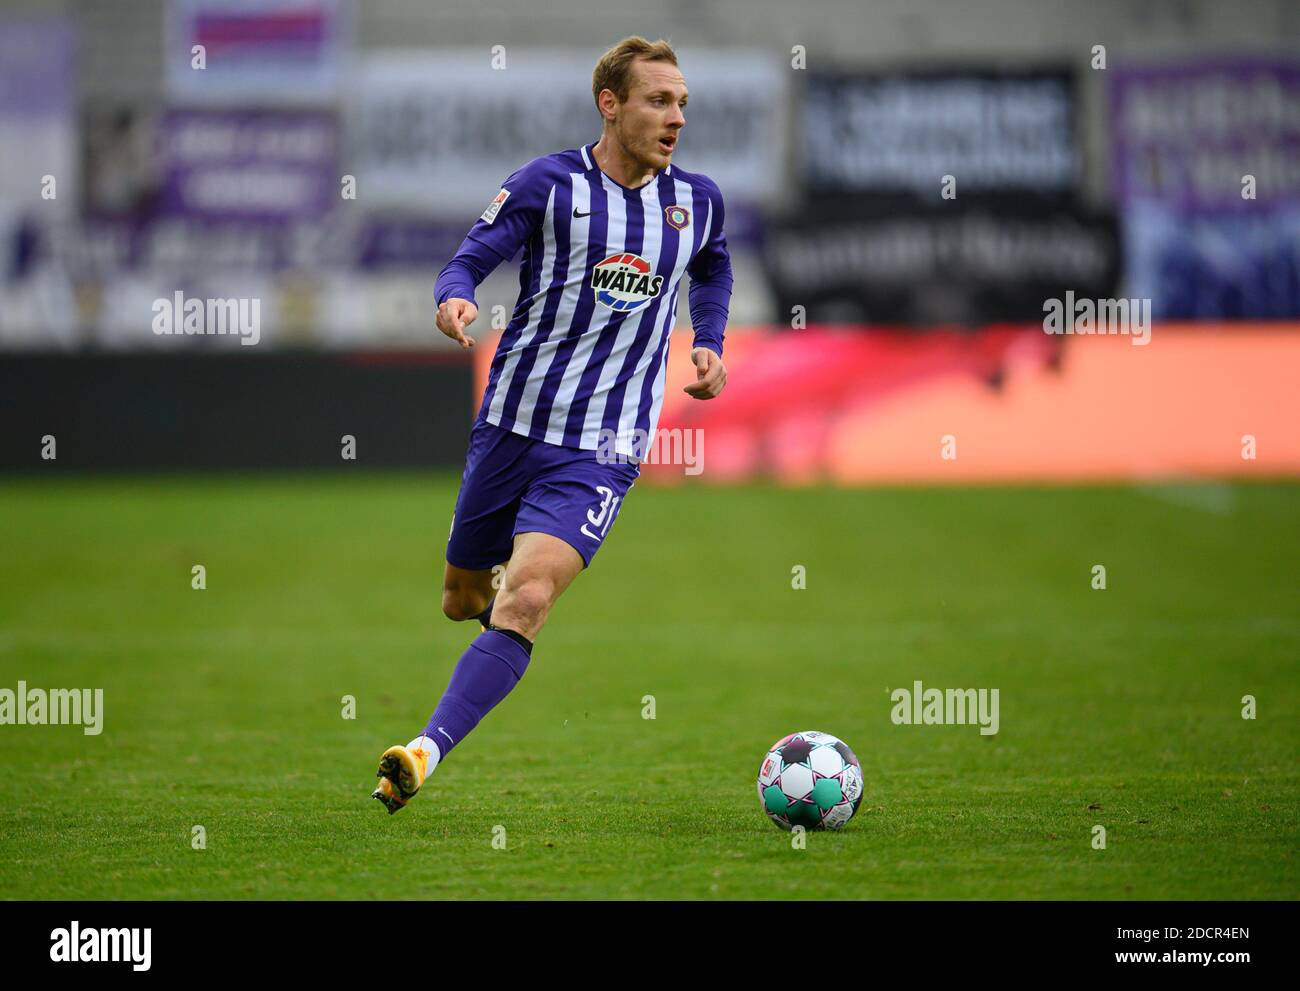 Aue, Germany. 22nd Nov, 2020. Football: 2nd Bundesliga, FC Erzgebirge Aue - SV Darmstadt 98, 8th matchday, at the Erzgebirgsstadion. Aues Ben Zolinski plays the ball. Credit: Robert Michael/dpa-Zentralbild/dpa - IMPORTANT NOTE: In accordance with the regulations of the DFL Deutsche Fußball Liga and the DFB Deutscher Fußball-Bund, it is prohibited to exploit or have exploited in the stadium and/or from the game taken photographs in the form of sequence images and/or video-like photo series./dpa/Alamy Live News Stock Photo